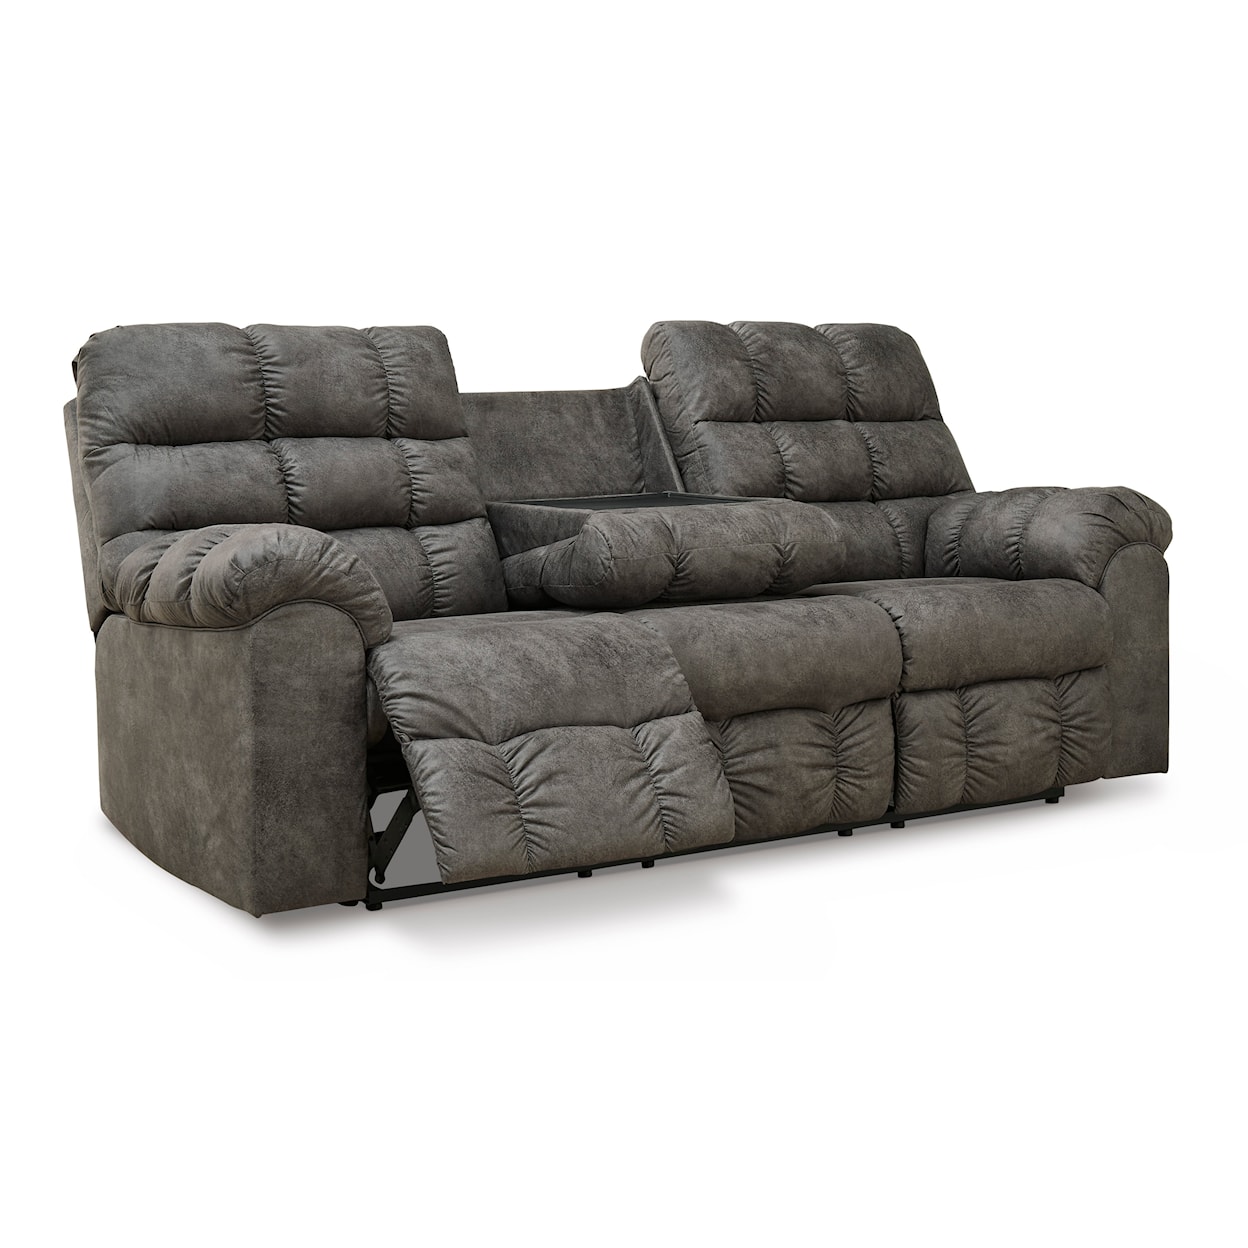 Signature Design by Ashley Furniture Derwin Reclining Sofa with Drop Down Table